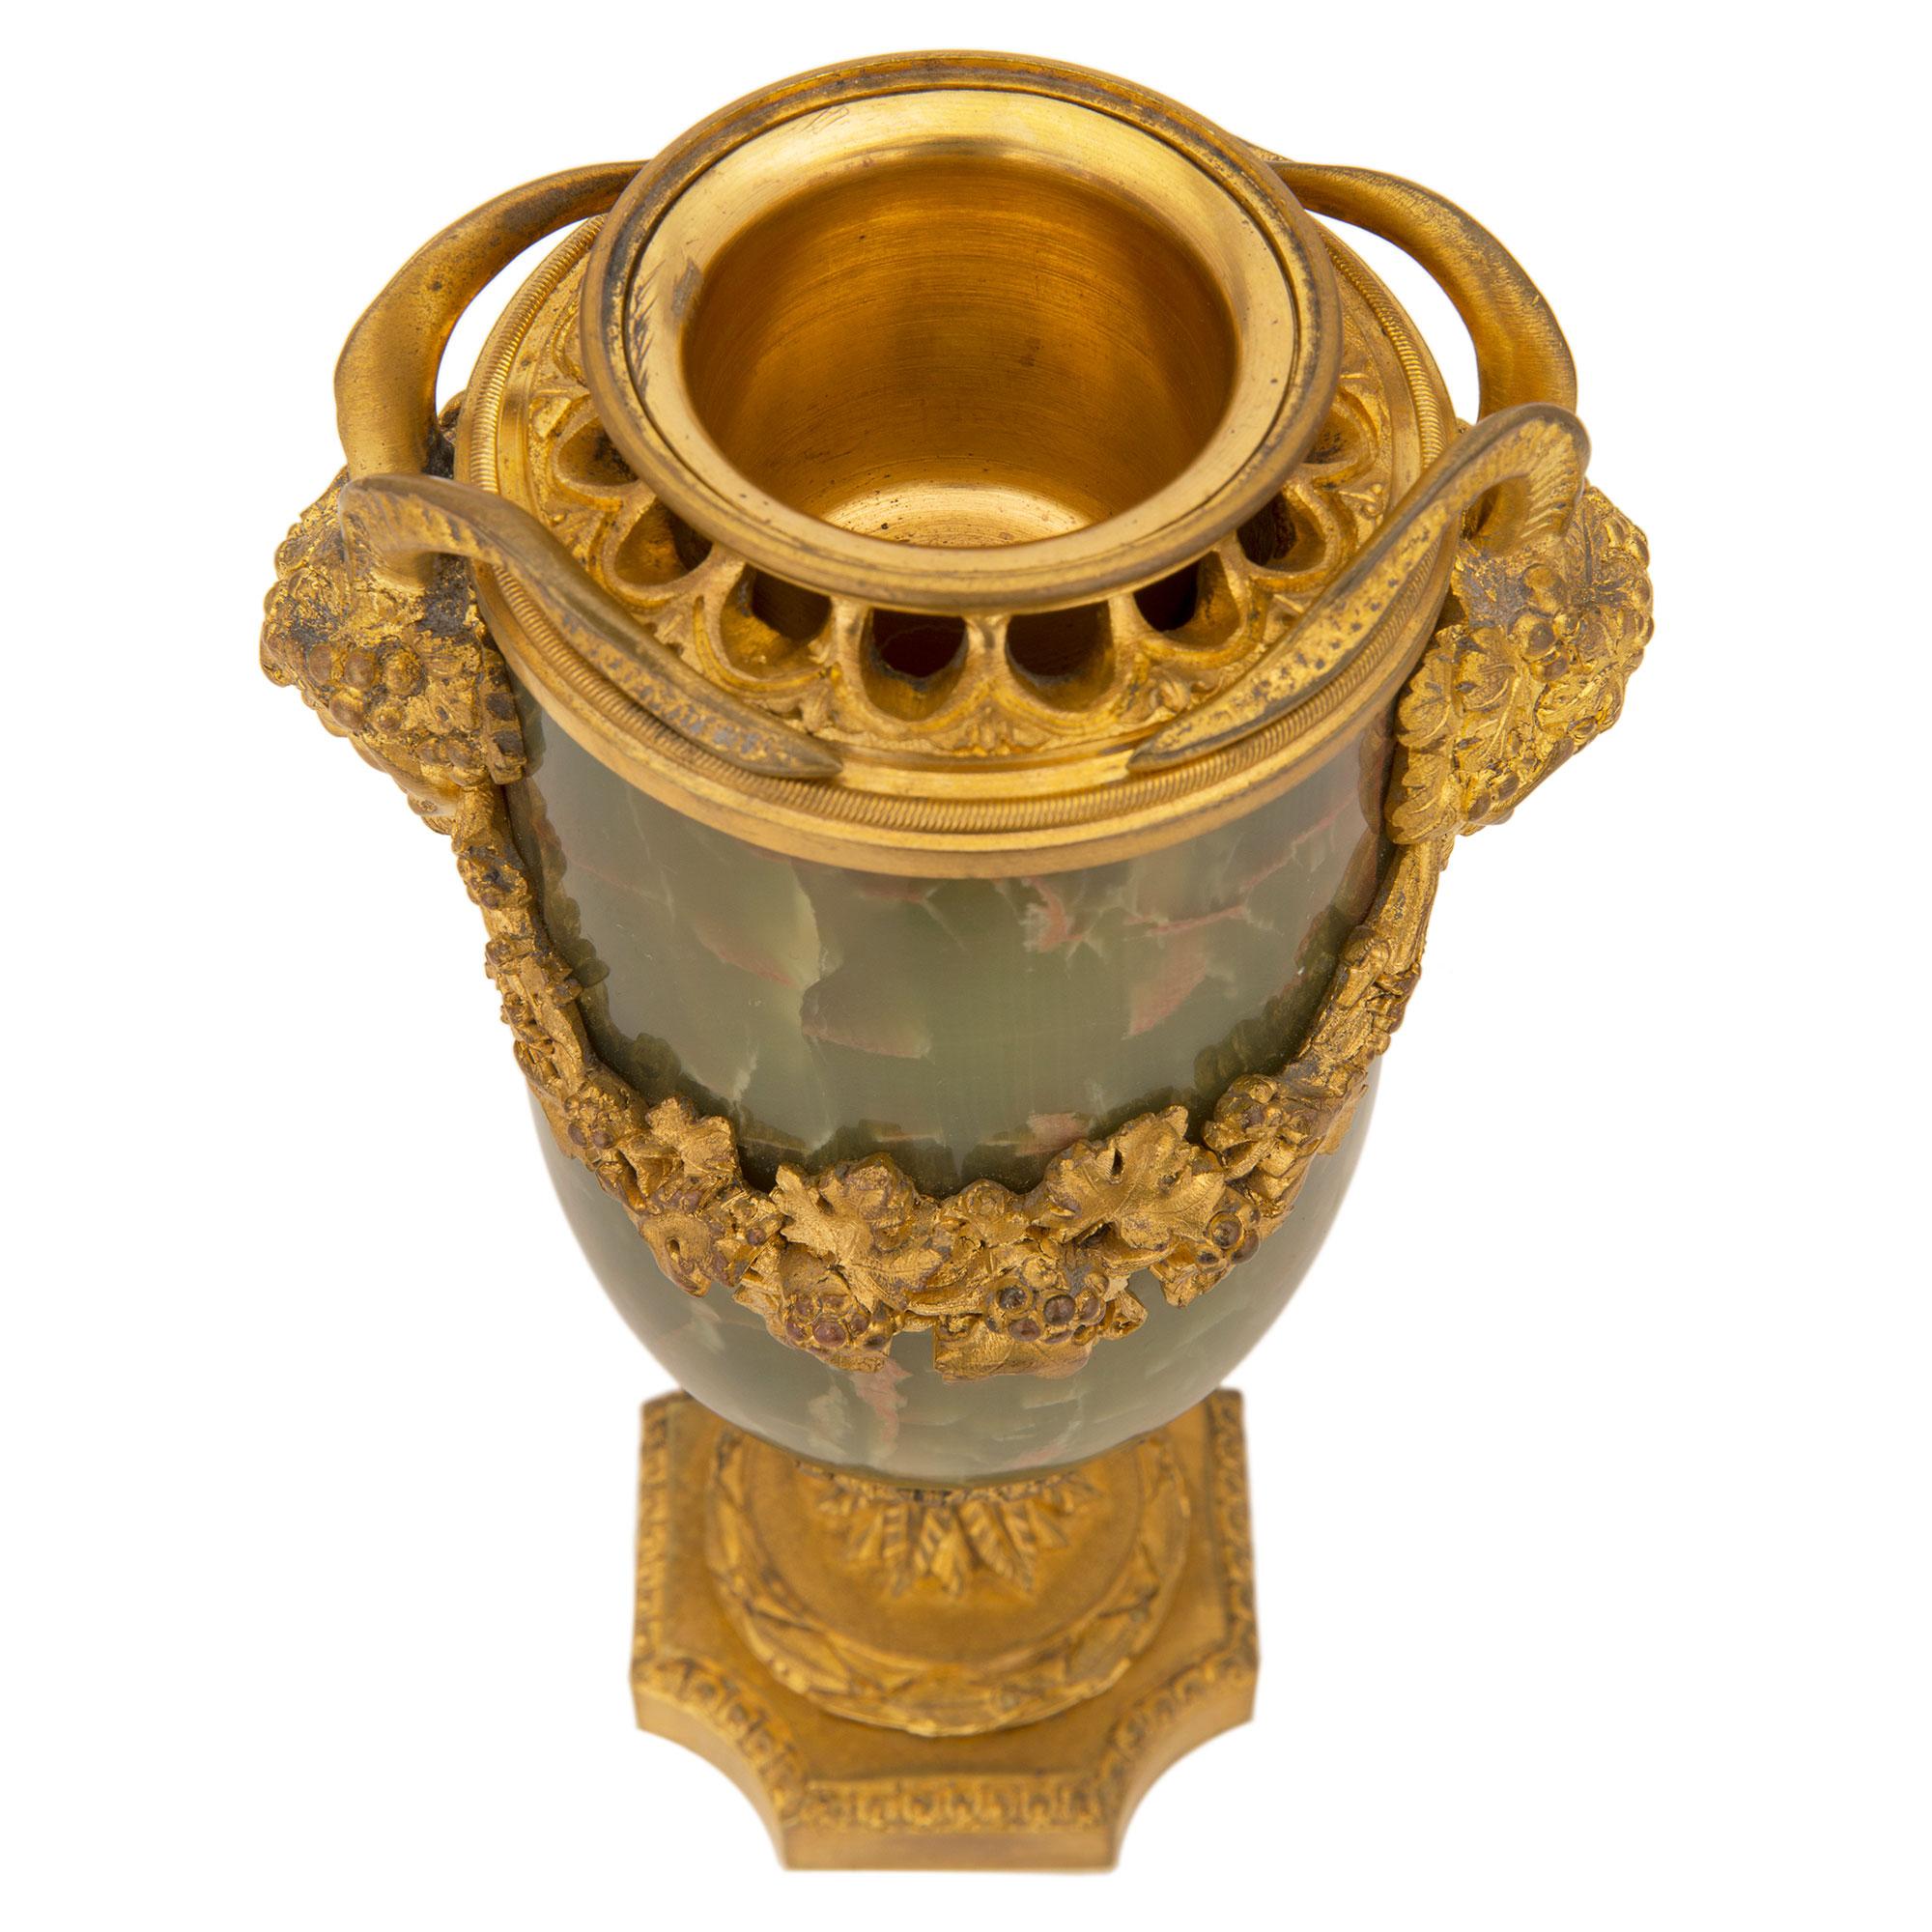 A remarkable pair of French 19th century Louis XVI st. onyx and ormolu lidded urns. Each urn is raised by a square ormolu base with concave corners and a delicate Coeur de Rai wrap around band. The socle shaped pedestals display Fine wrap around